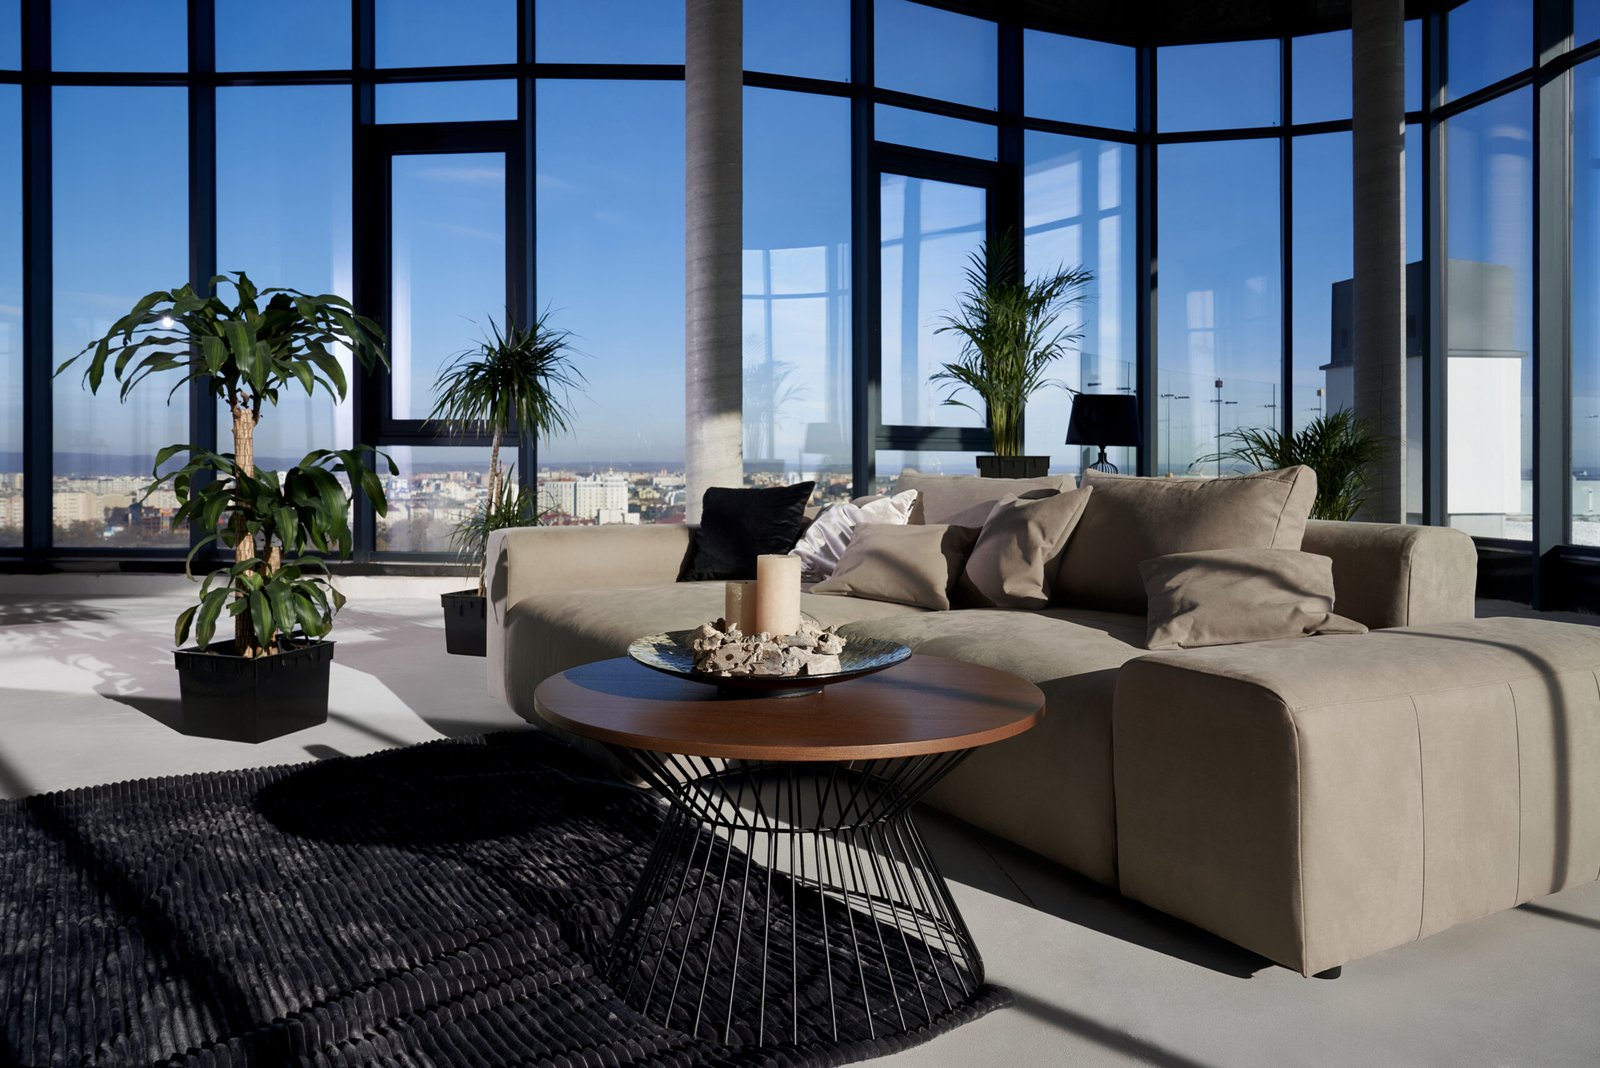 Front view of fashionable interior spacious room with large panoramic window with incredible view on city and cozy grey sofa with pillows and green flowerpots.